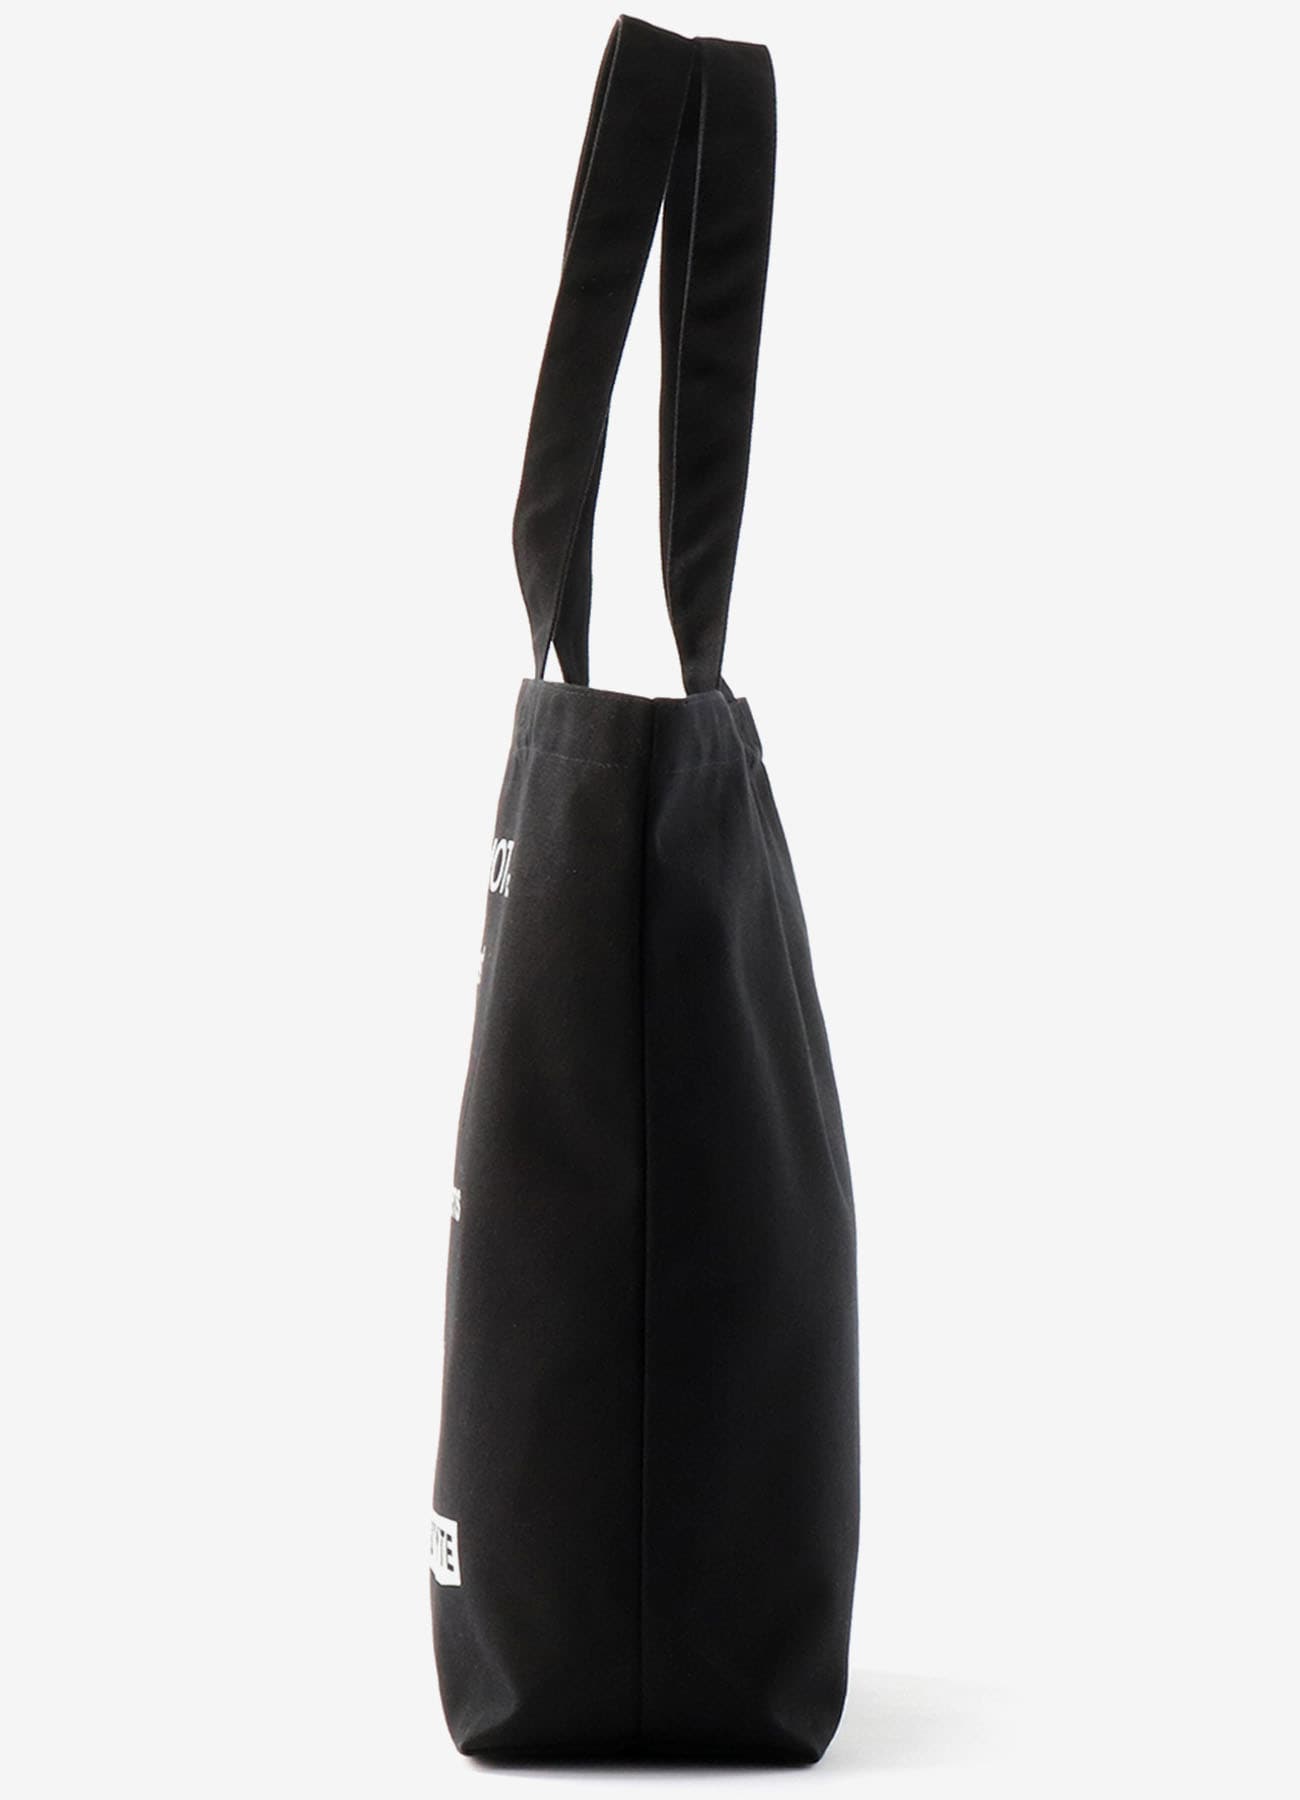 Black Is Modest Message tote